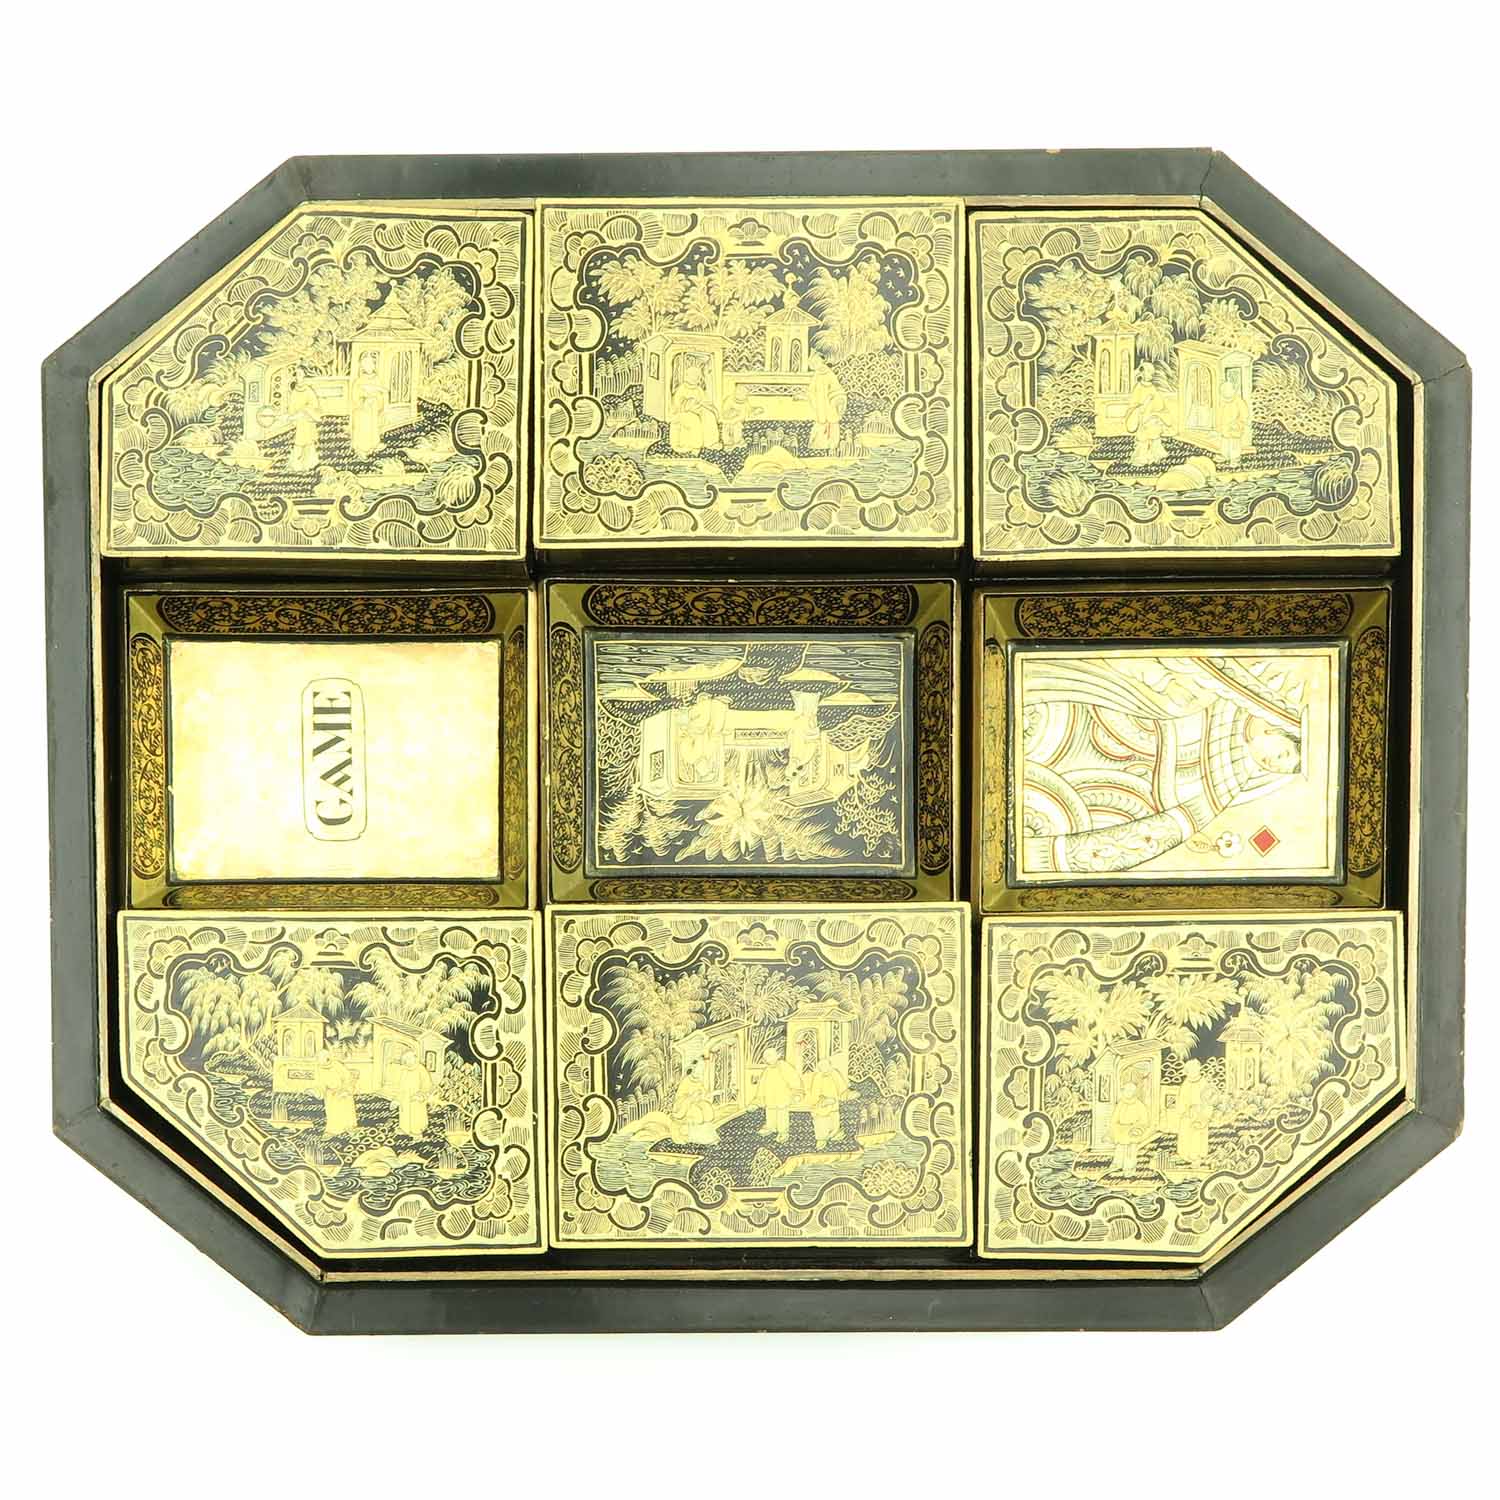 A Chinese Lacquer Game Box - Image 6 of 10